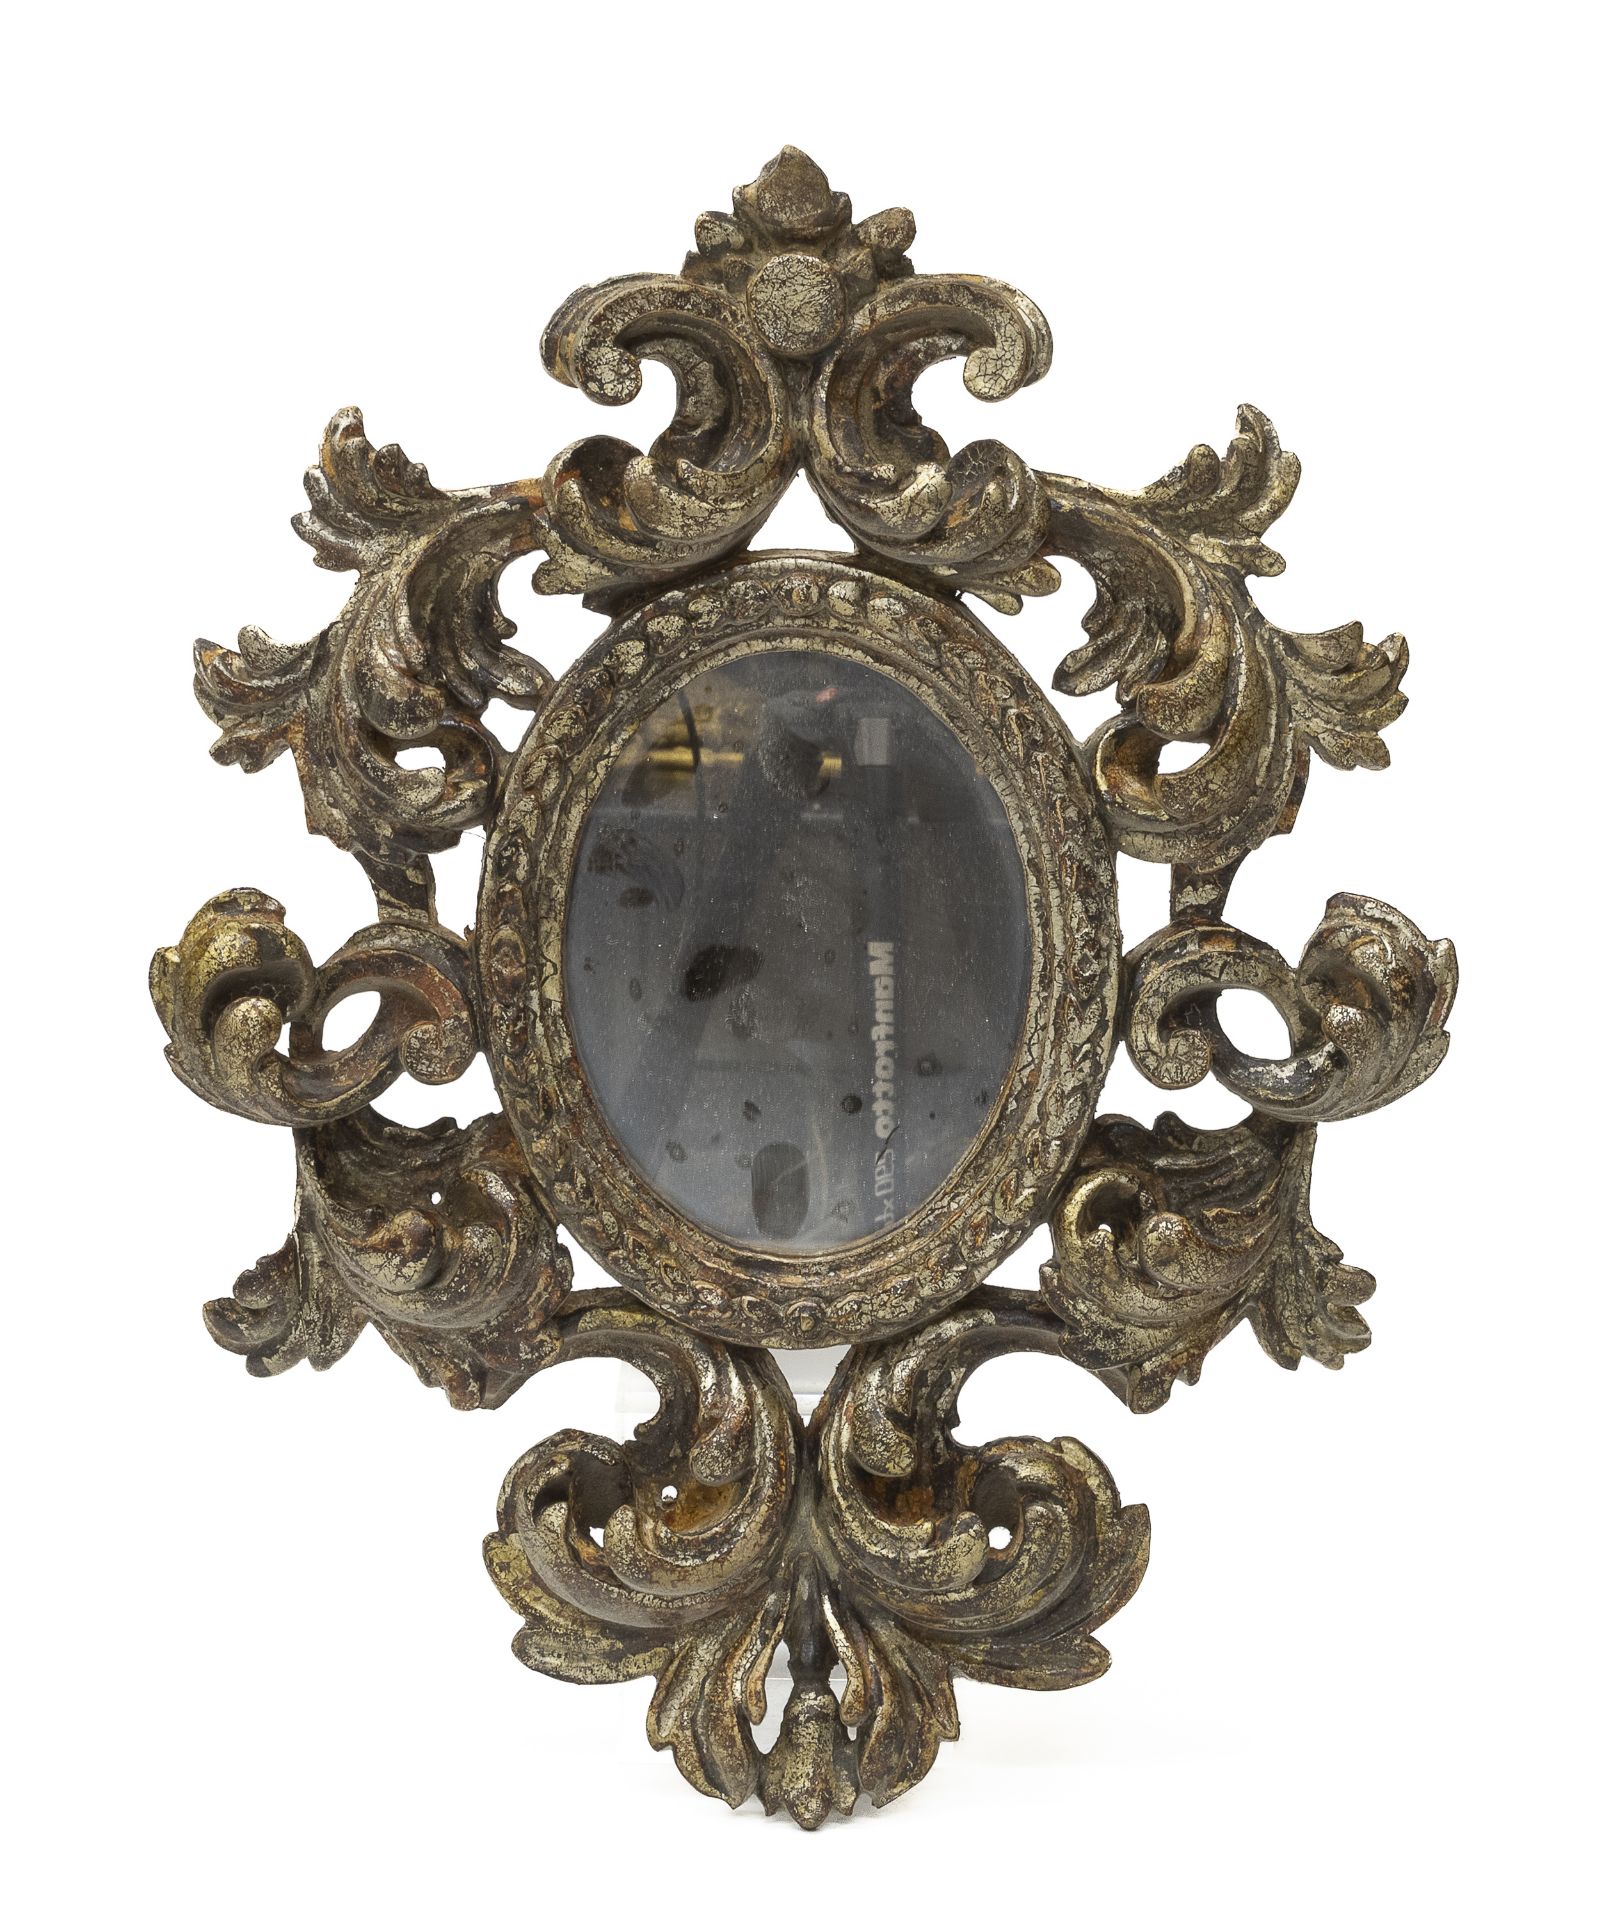 SMALL SILVER-PLATED WOOD MIRROR EARLY 20TH CENTURY